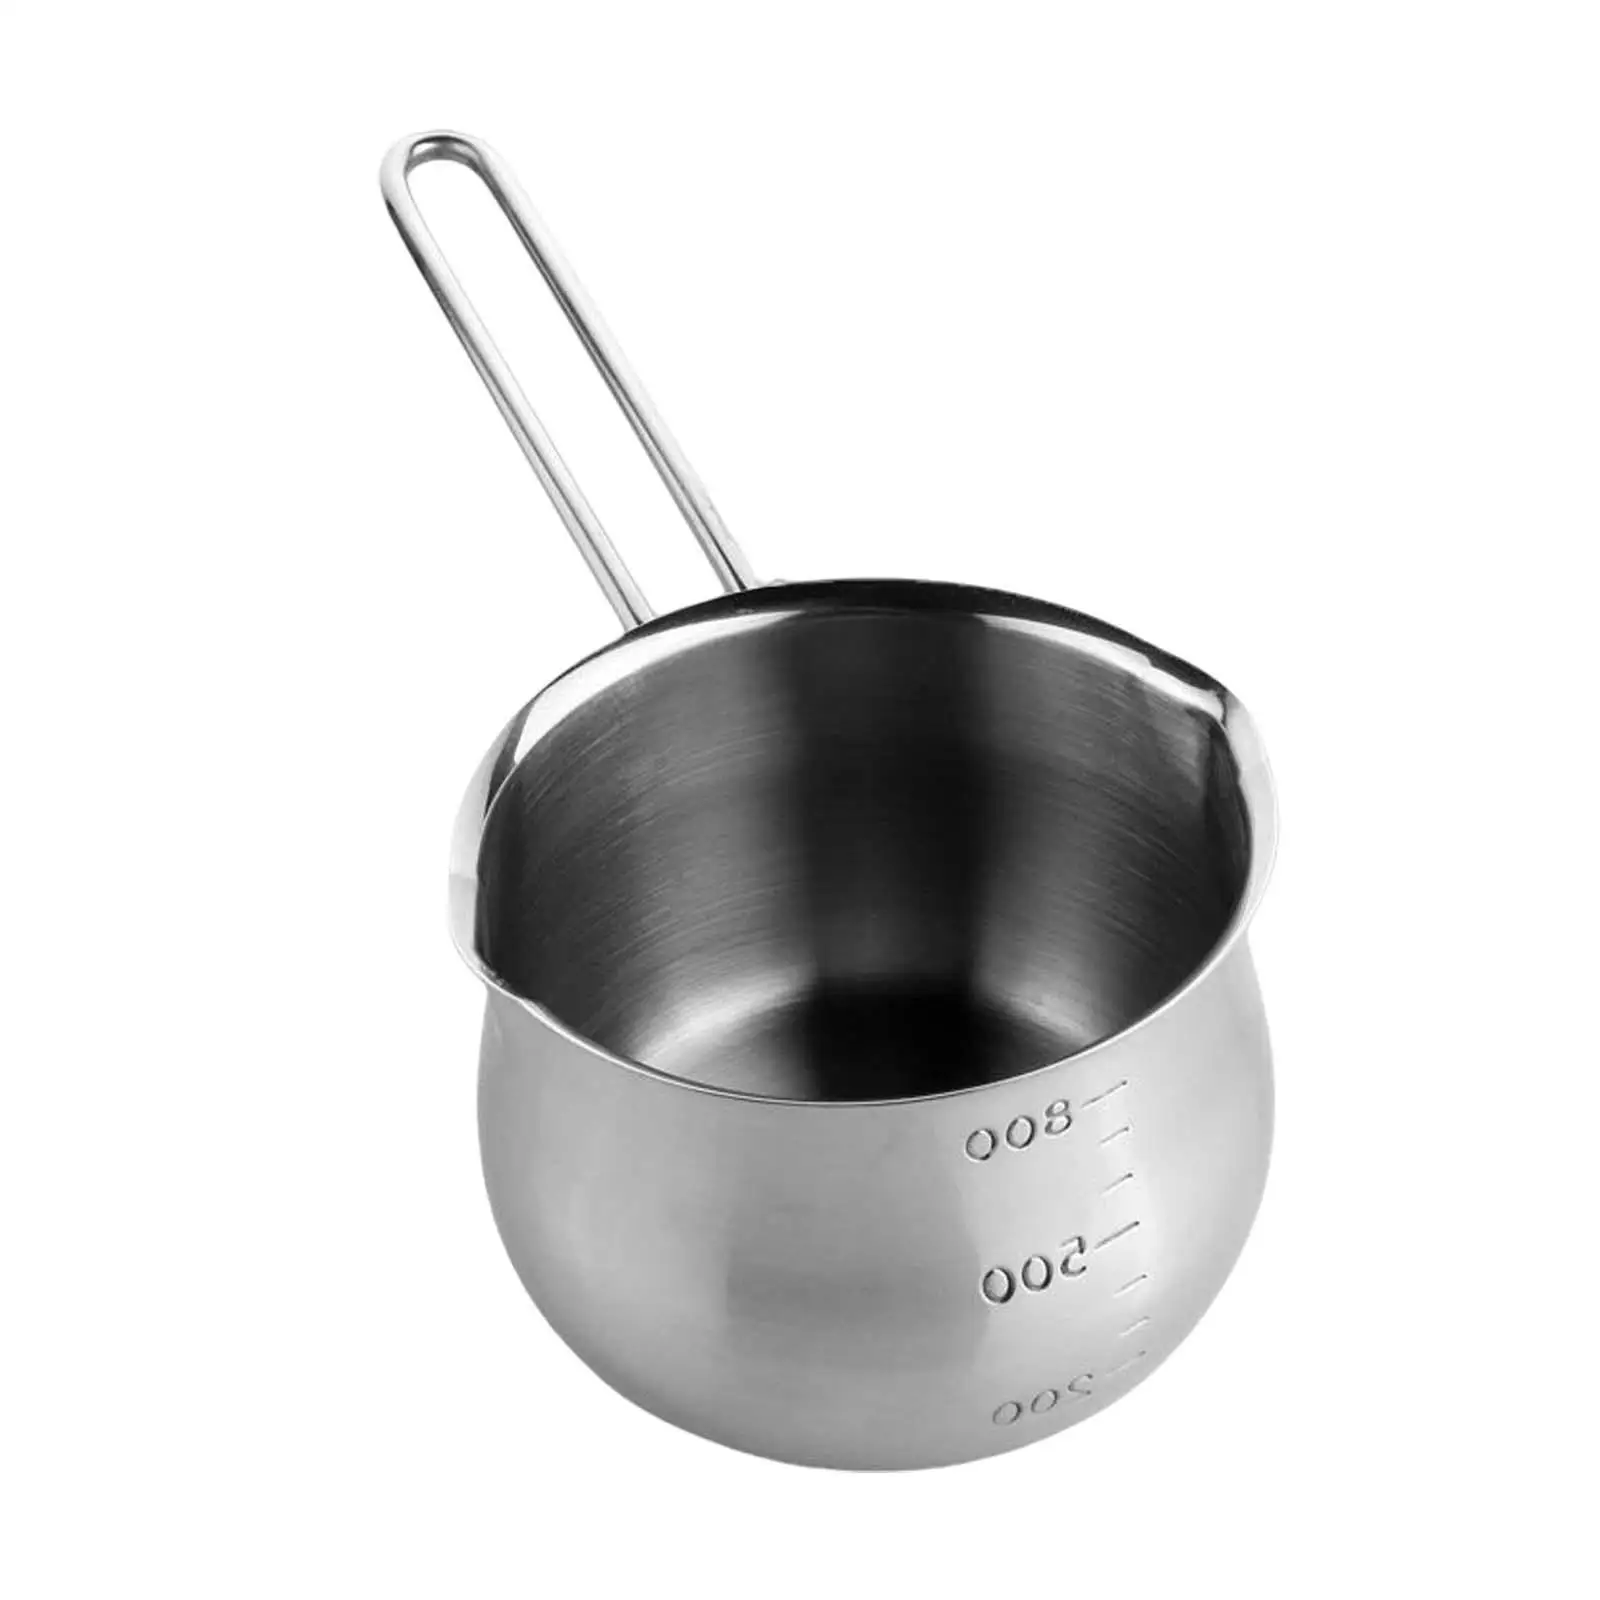 Small Milk Pot for Melting Breakfast Pot, Cookware, Coffee Pot with Handle